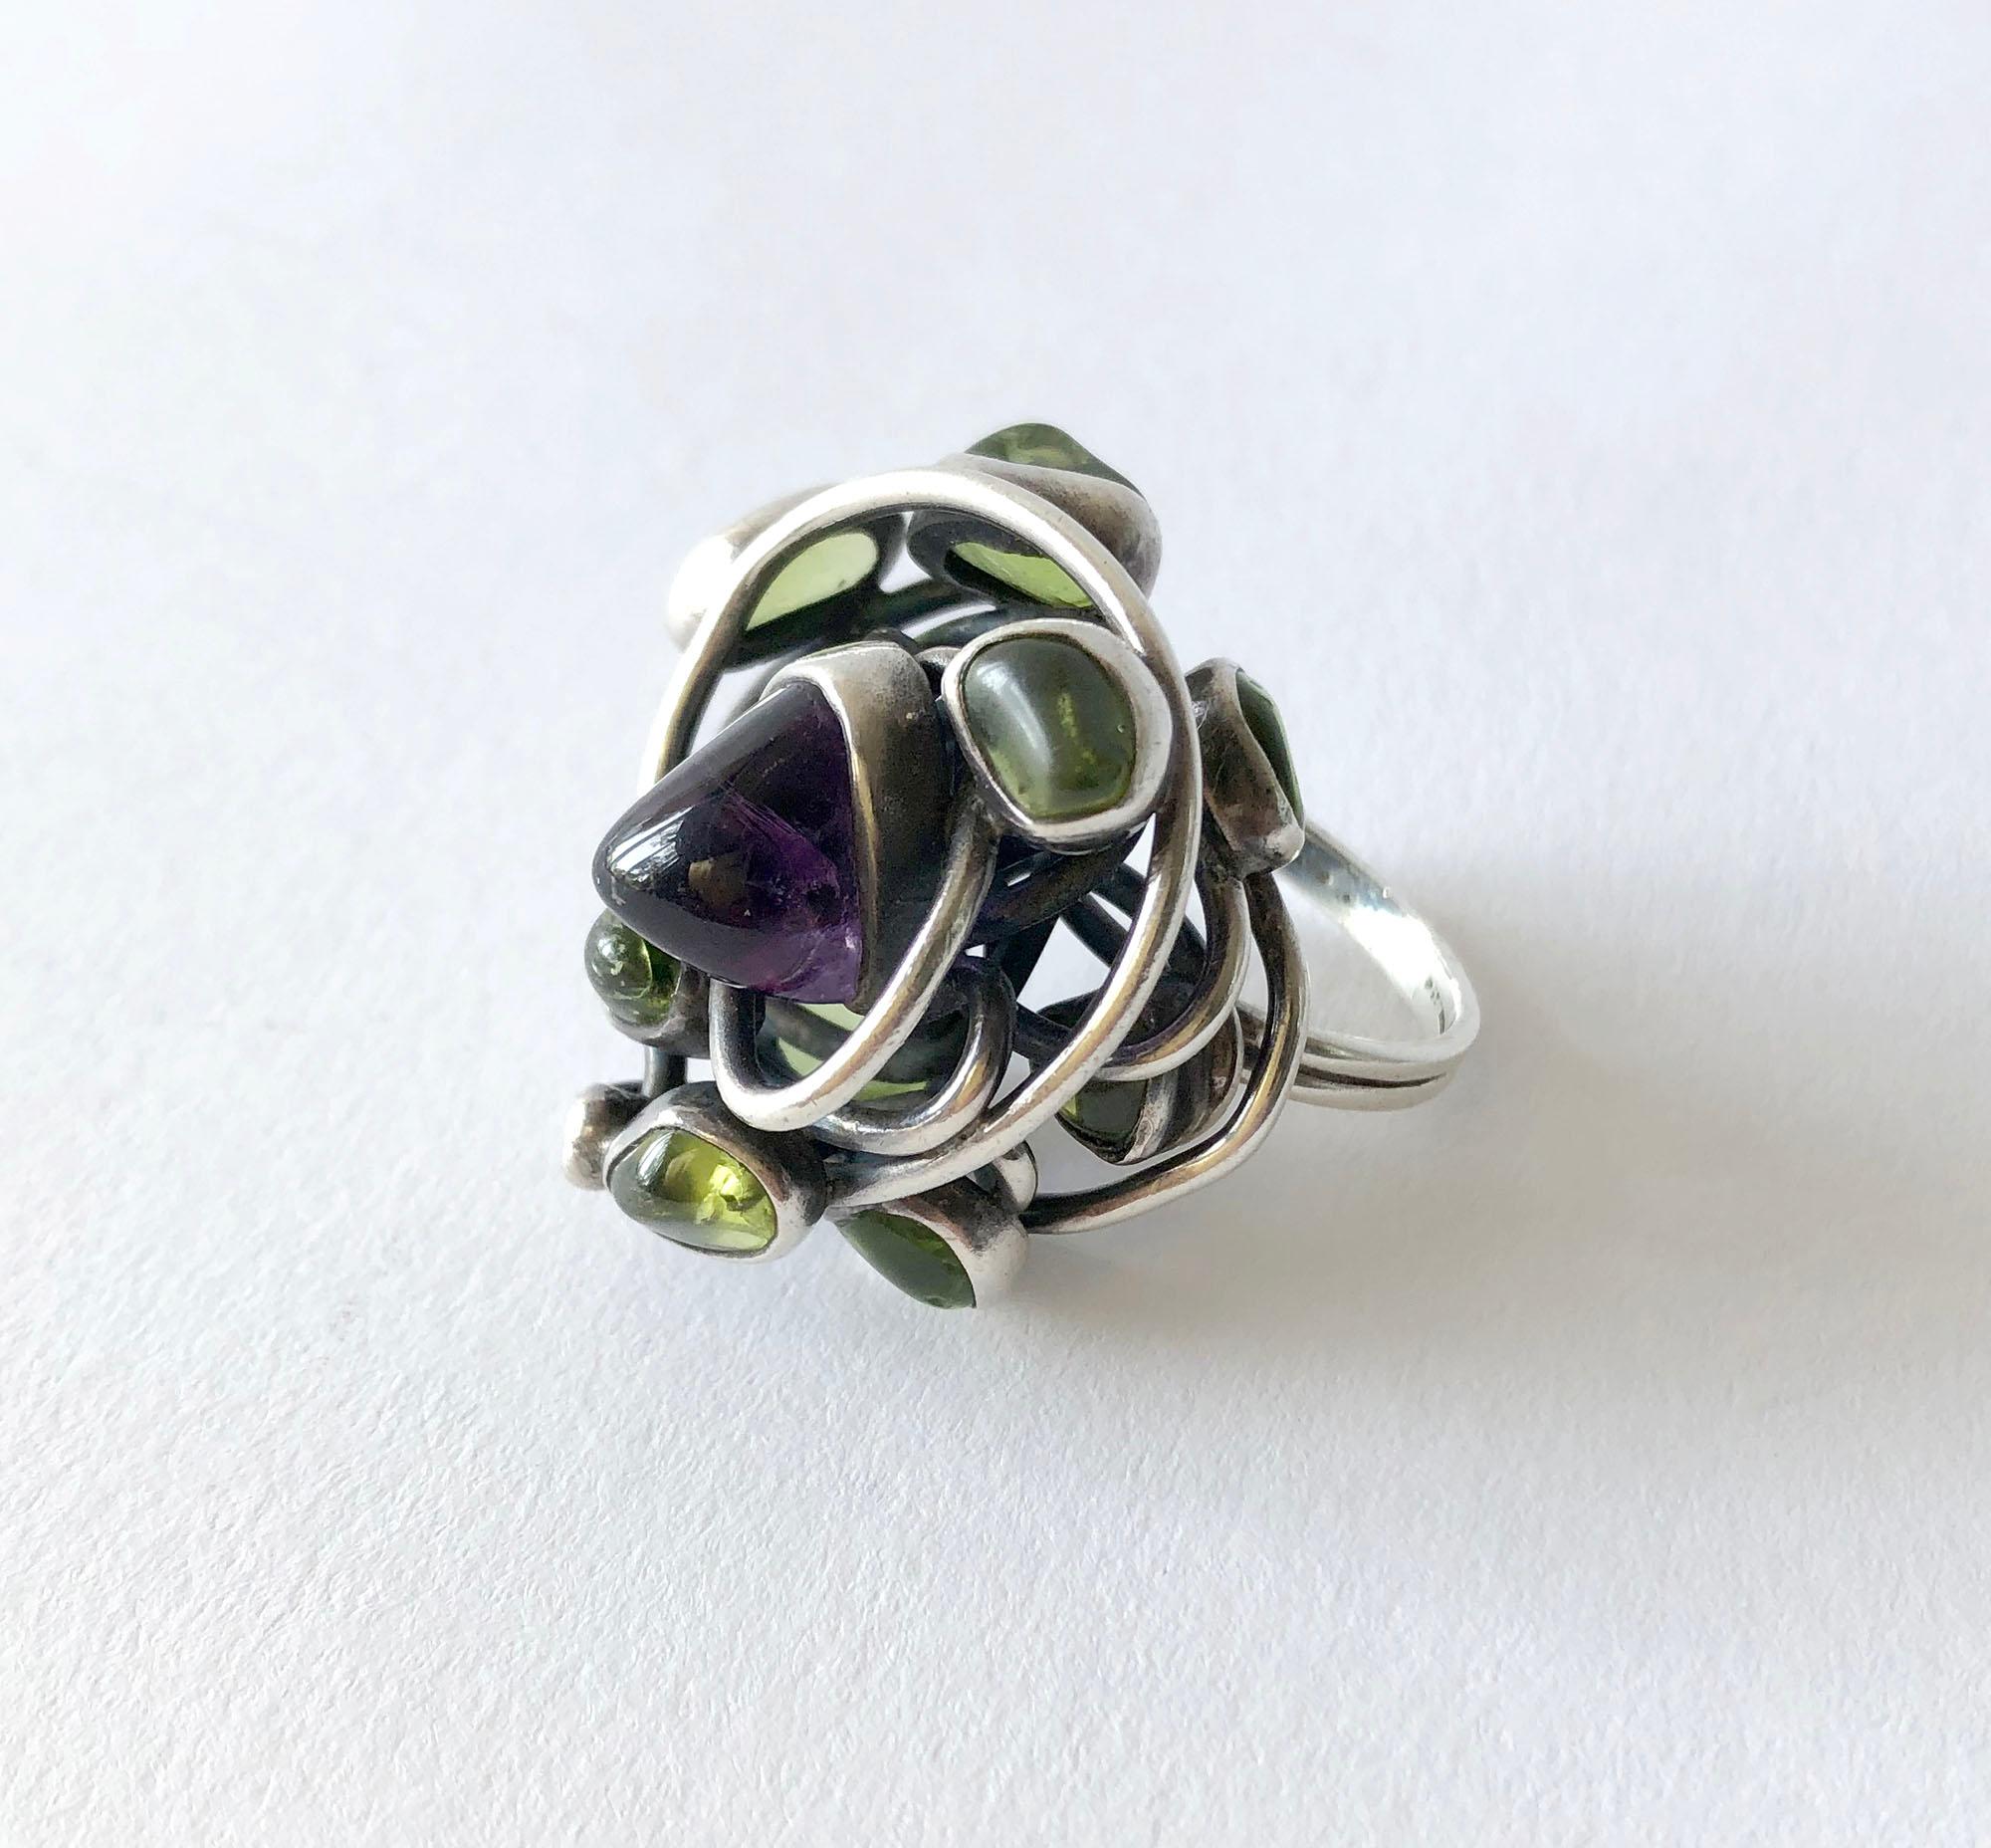 Nest of heavy gauge sterling silver wire ring set with natural tumbled amethyst and peridot created by H. Fred Skaggs of Scottsdale, Arizona. Ring is a finger size 8 while its top, nest portion measures 1.25